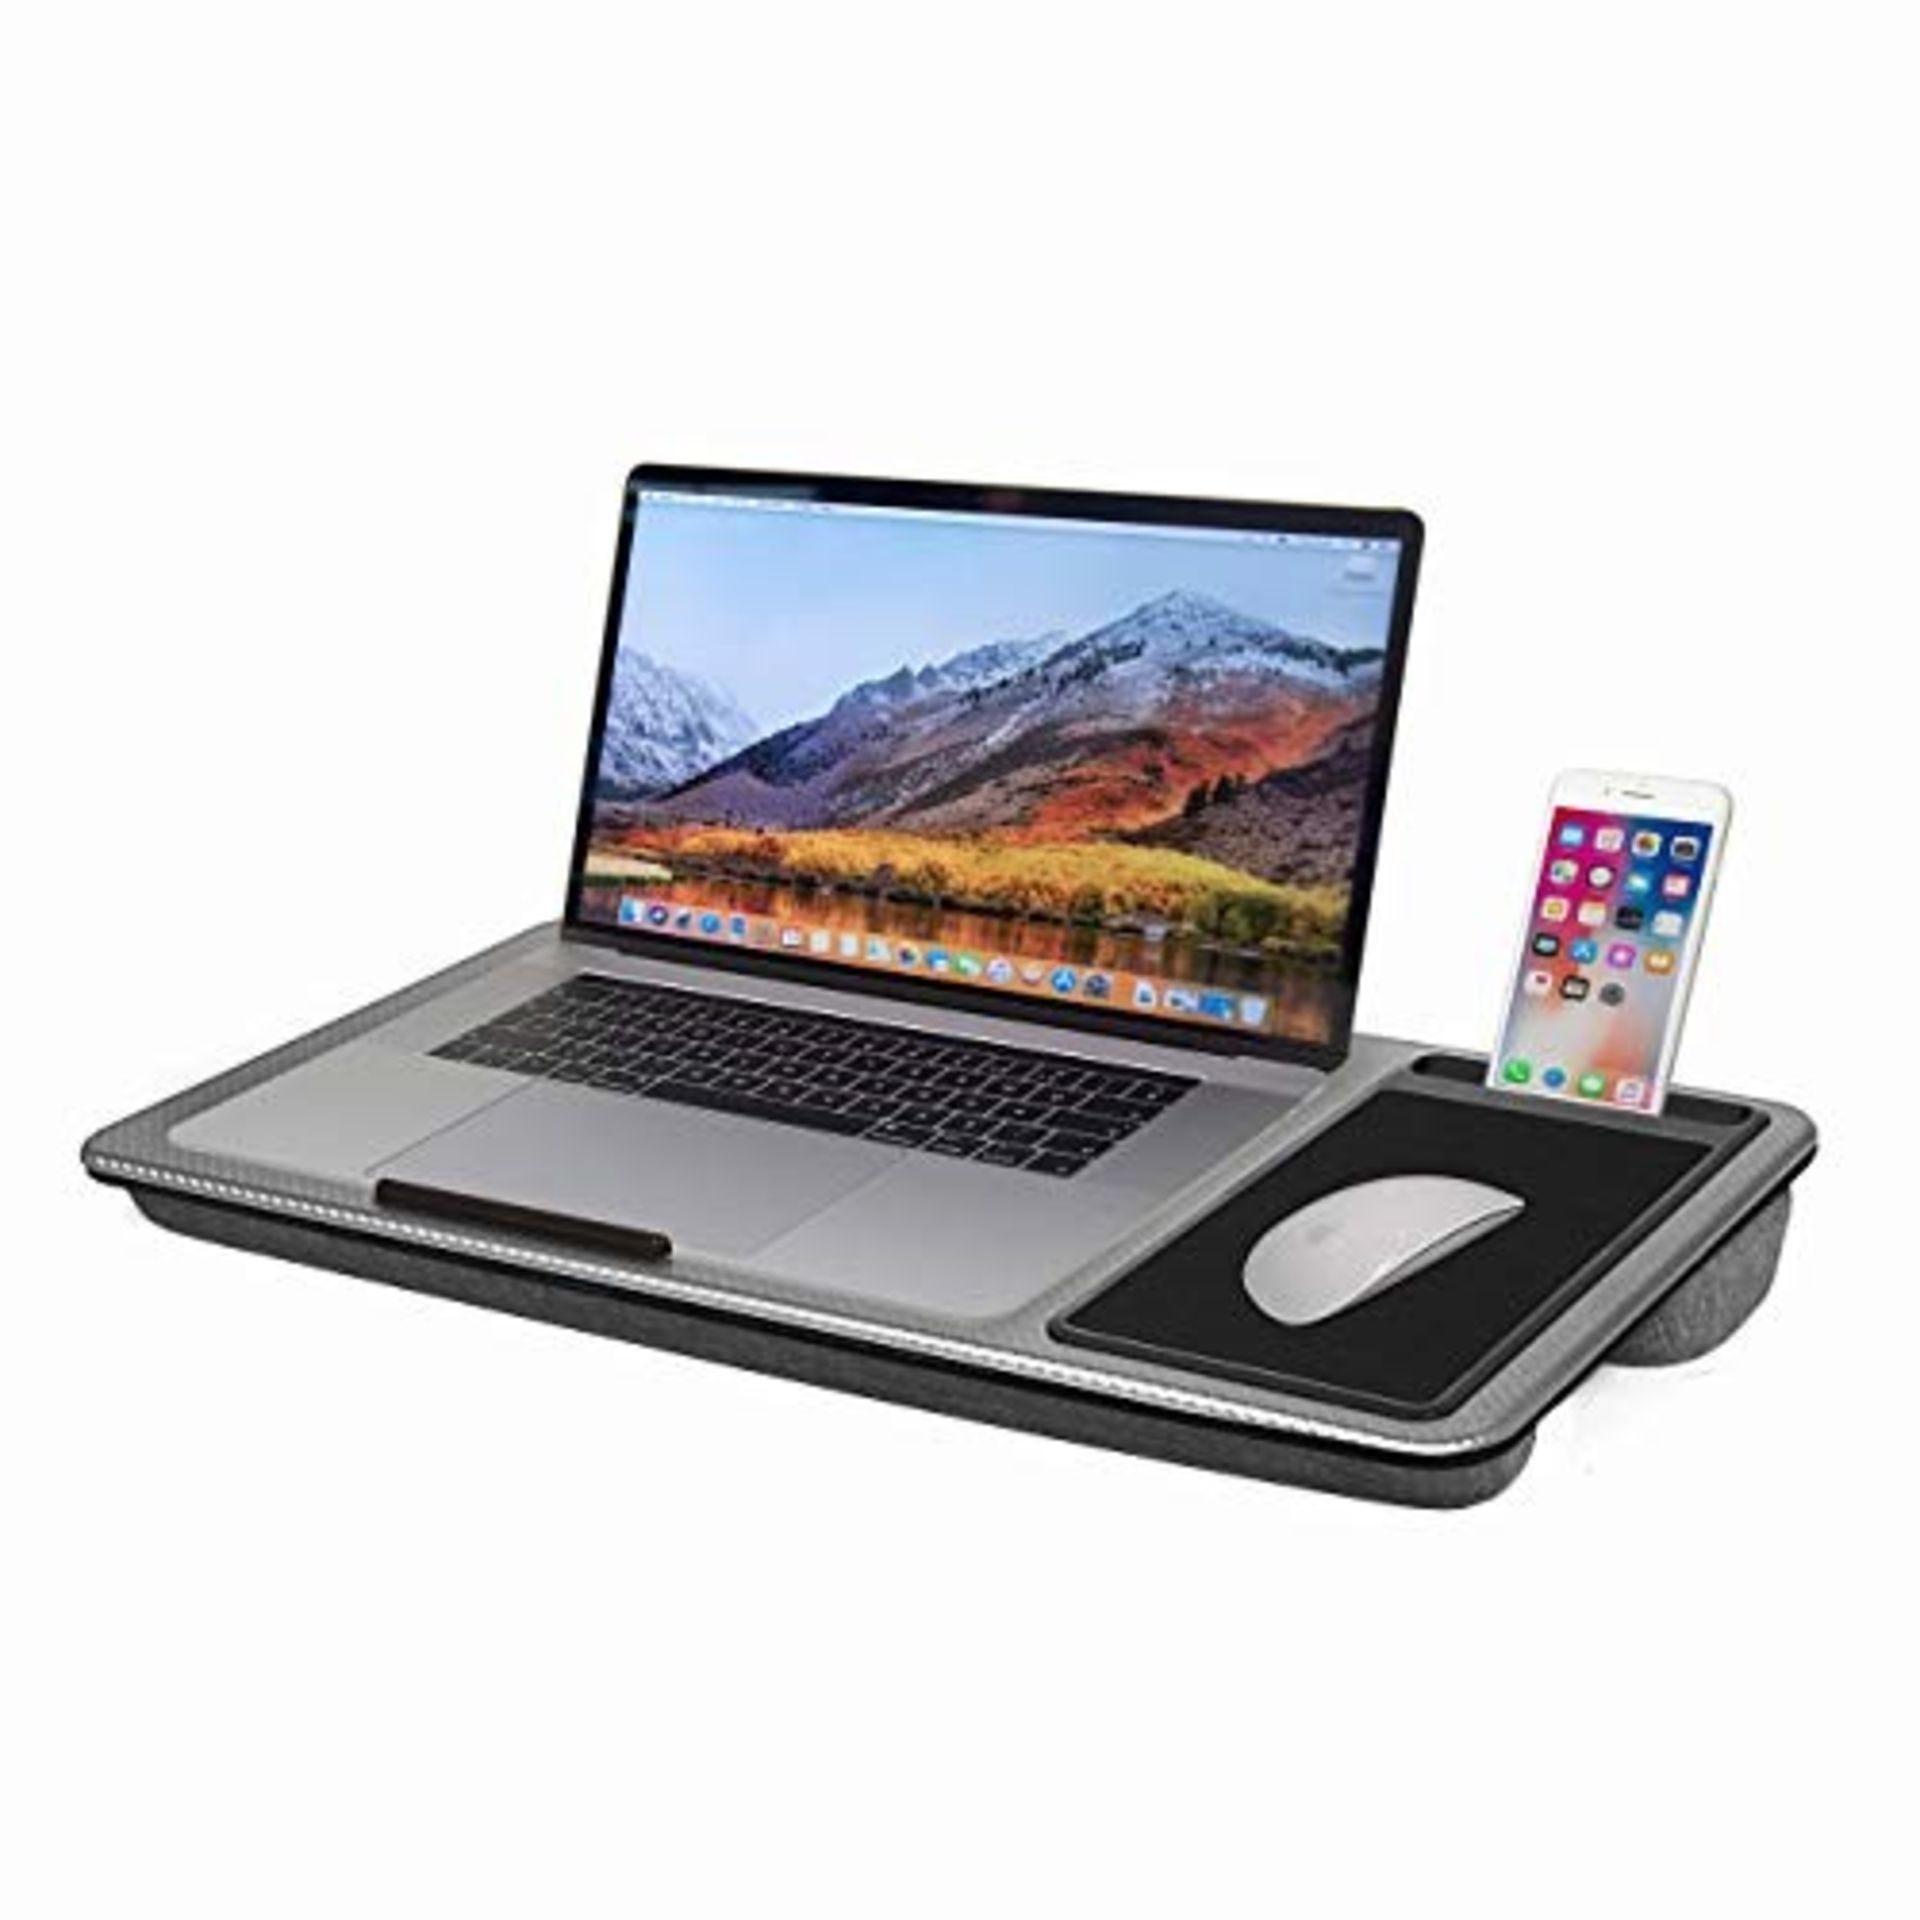 SEFFO Lap Desk Laptop Stand Portable Tray With Cushion, Built-In Mouse Pad And Phone H